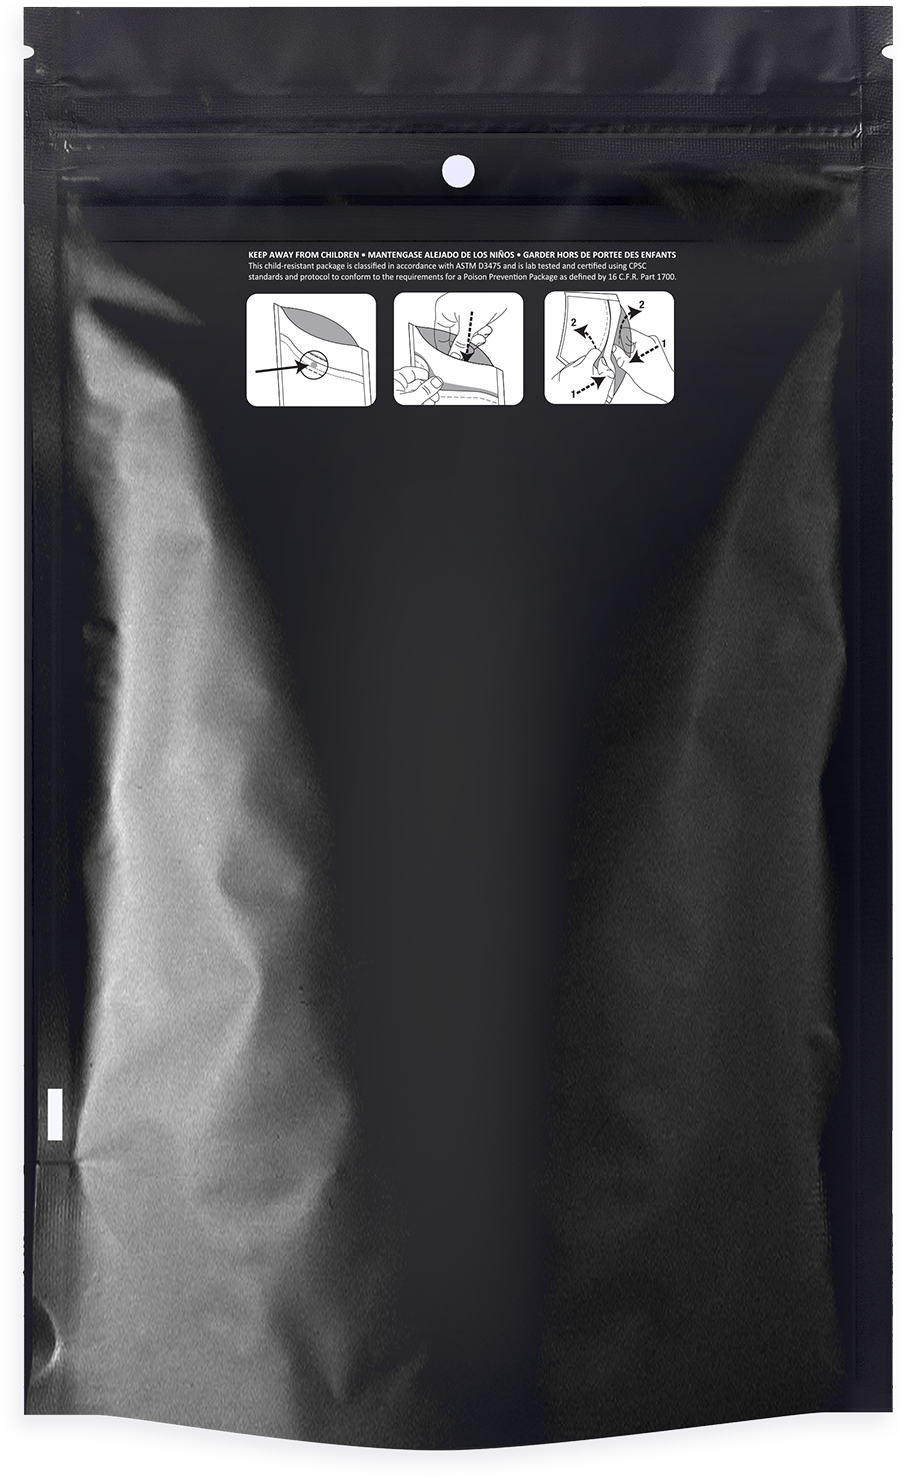 Black Fully Recyclable Child Resistant Pouch 28g or 1oz capacity